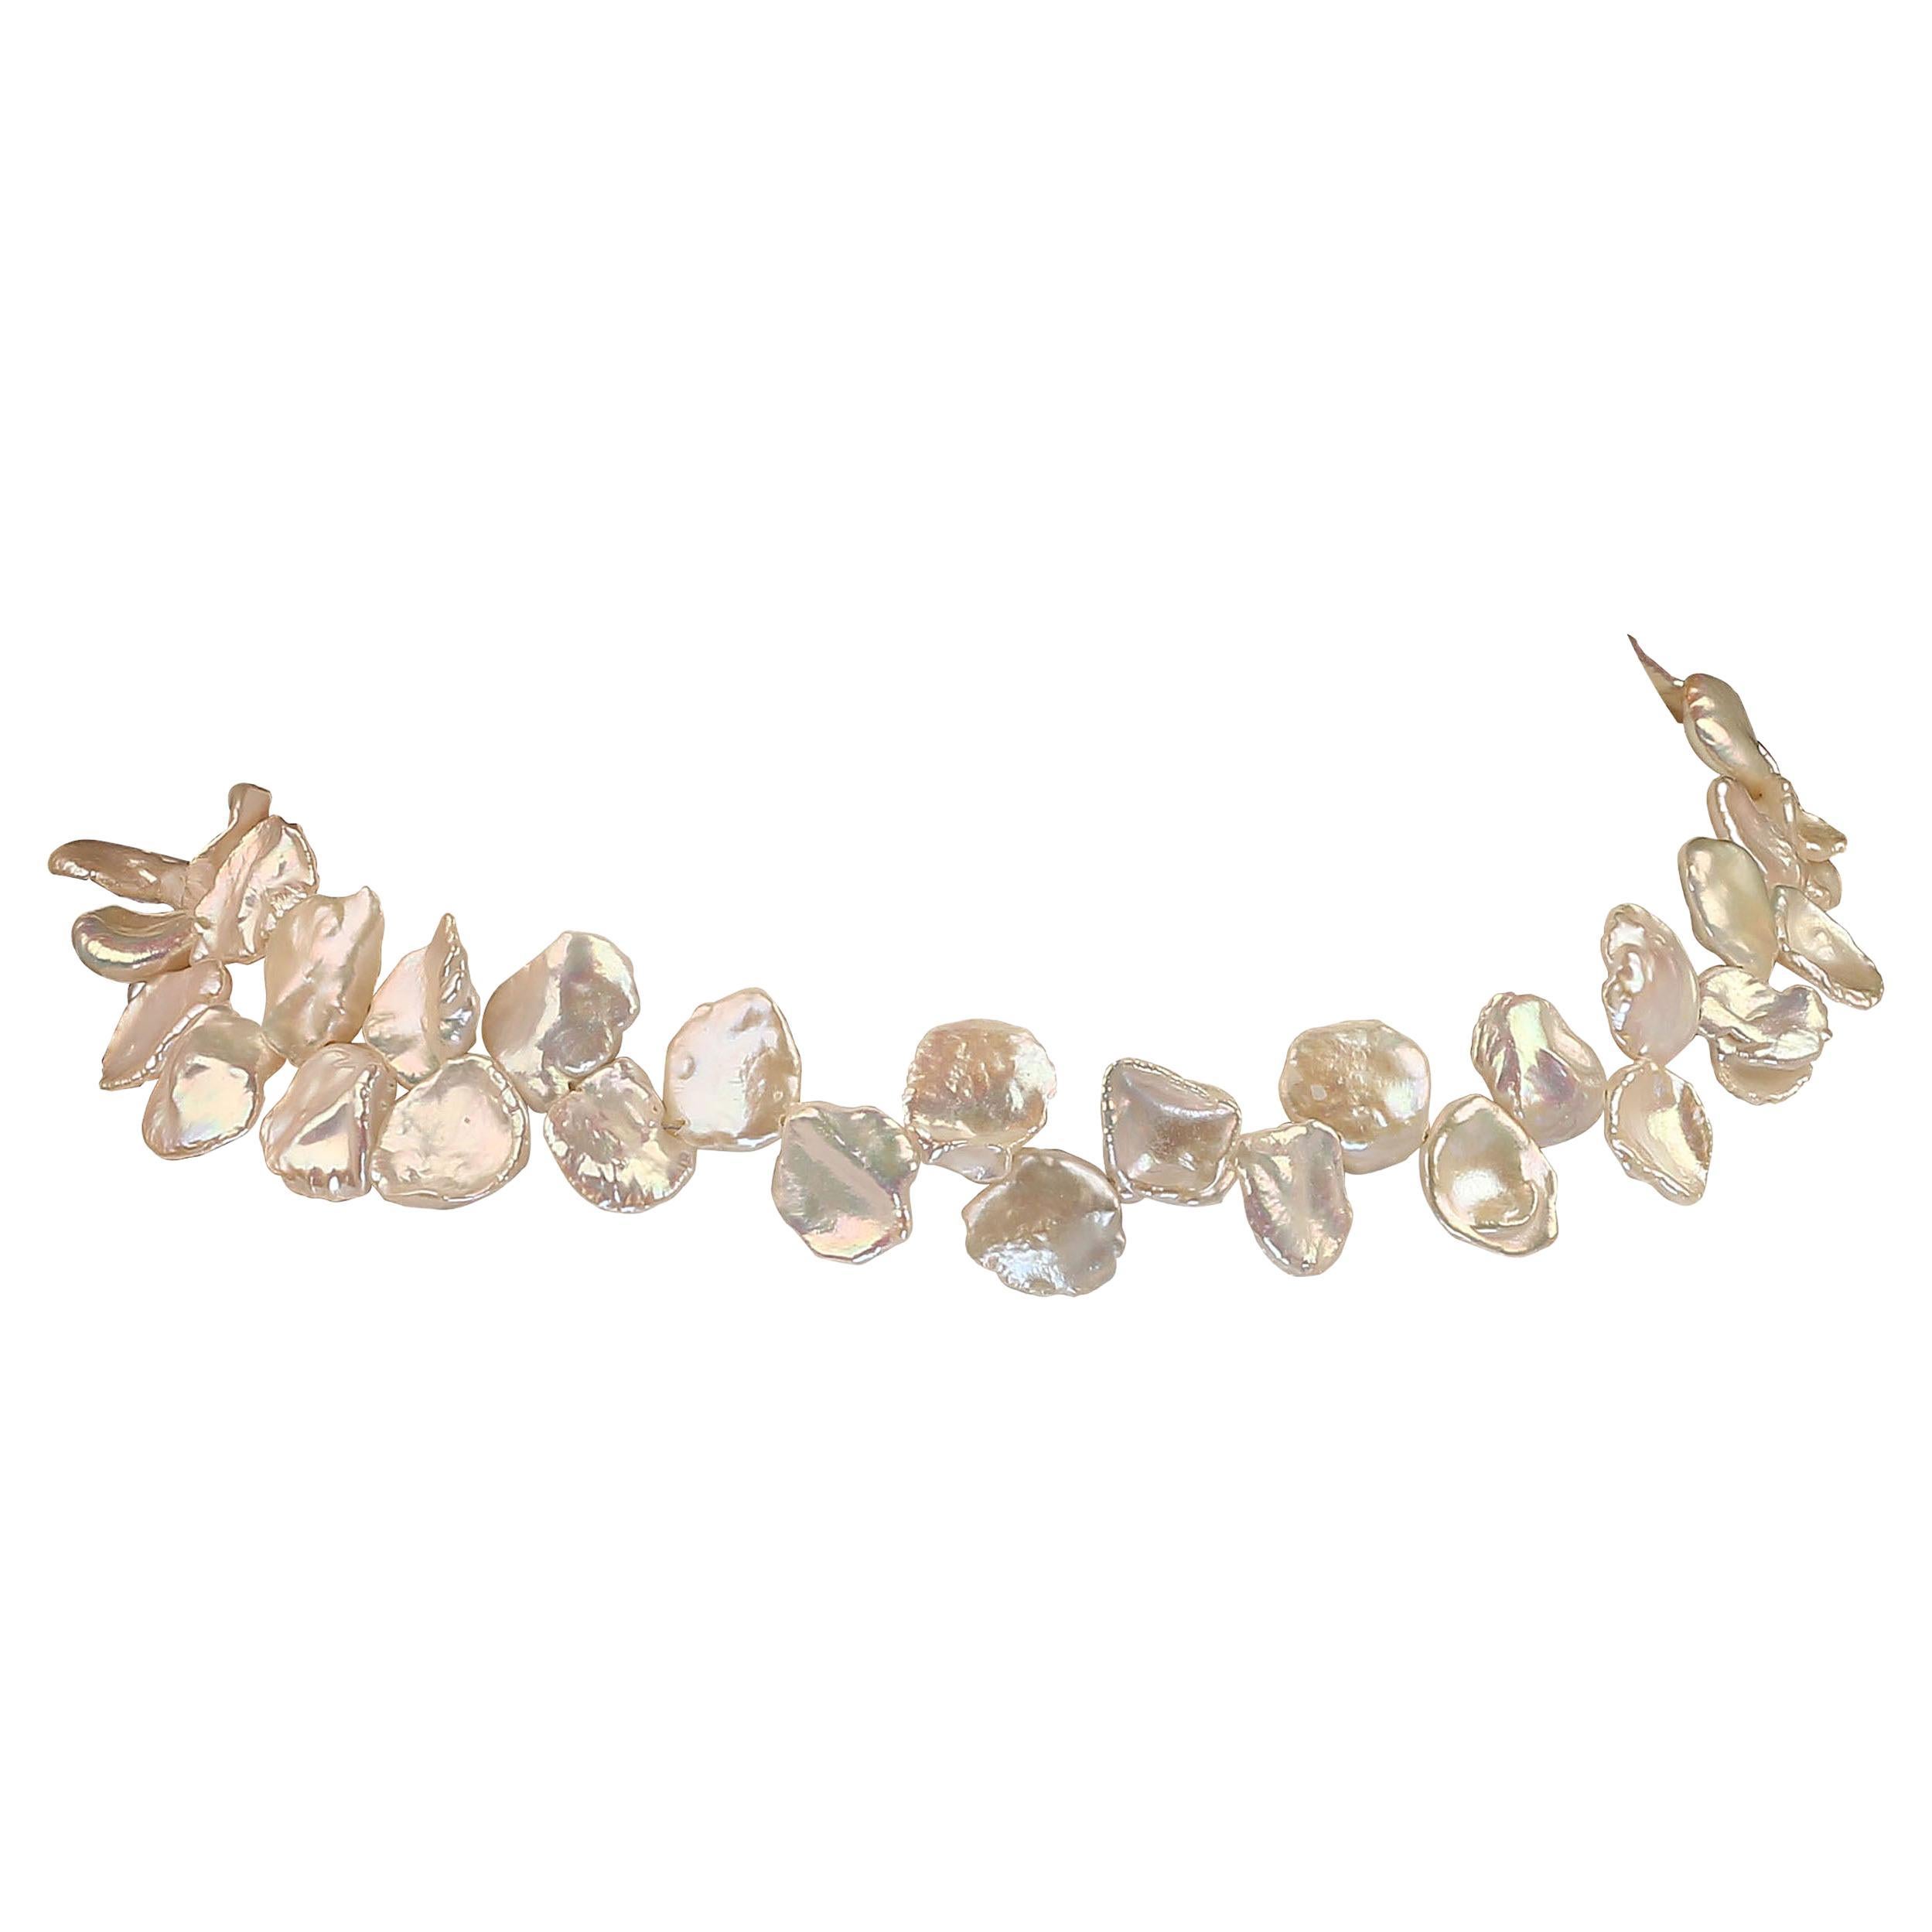 AJD Delightful 14 Inch Choker Collar Necklace of White Keshi Pearls